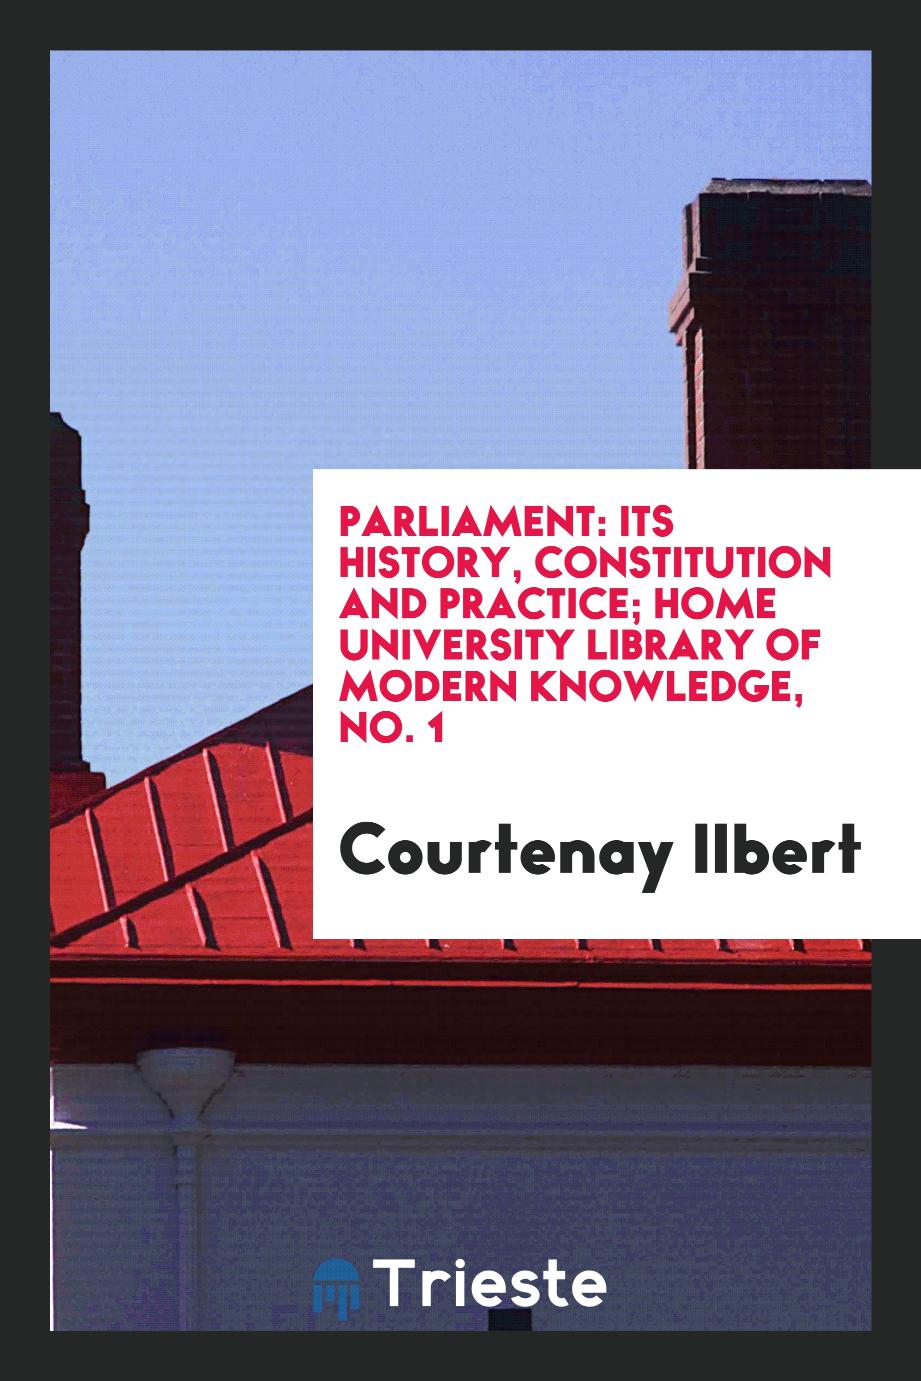 Parliament: its history, constitution and practice; Home University Library of modern knowledge, No. 1